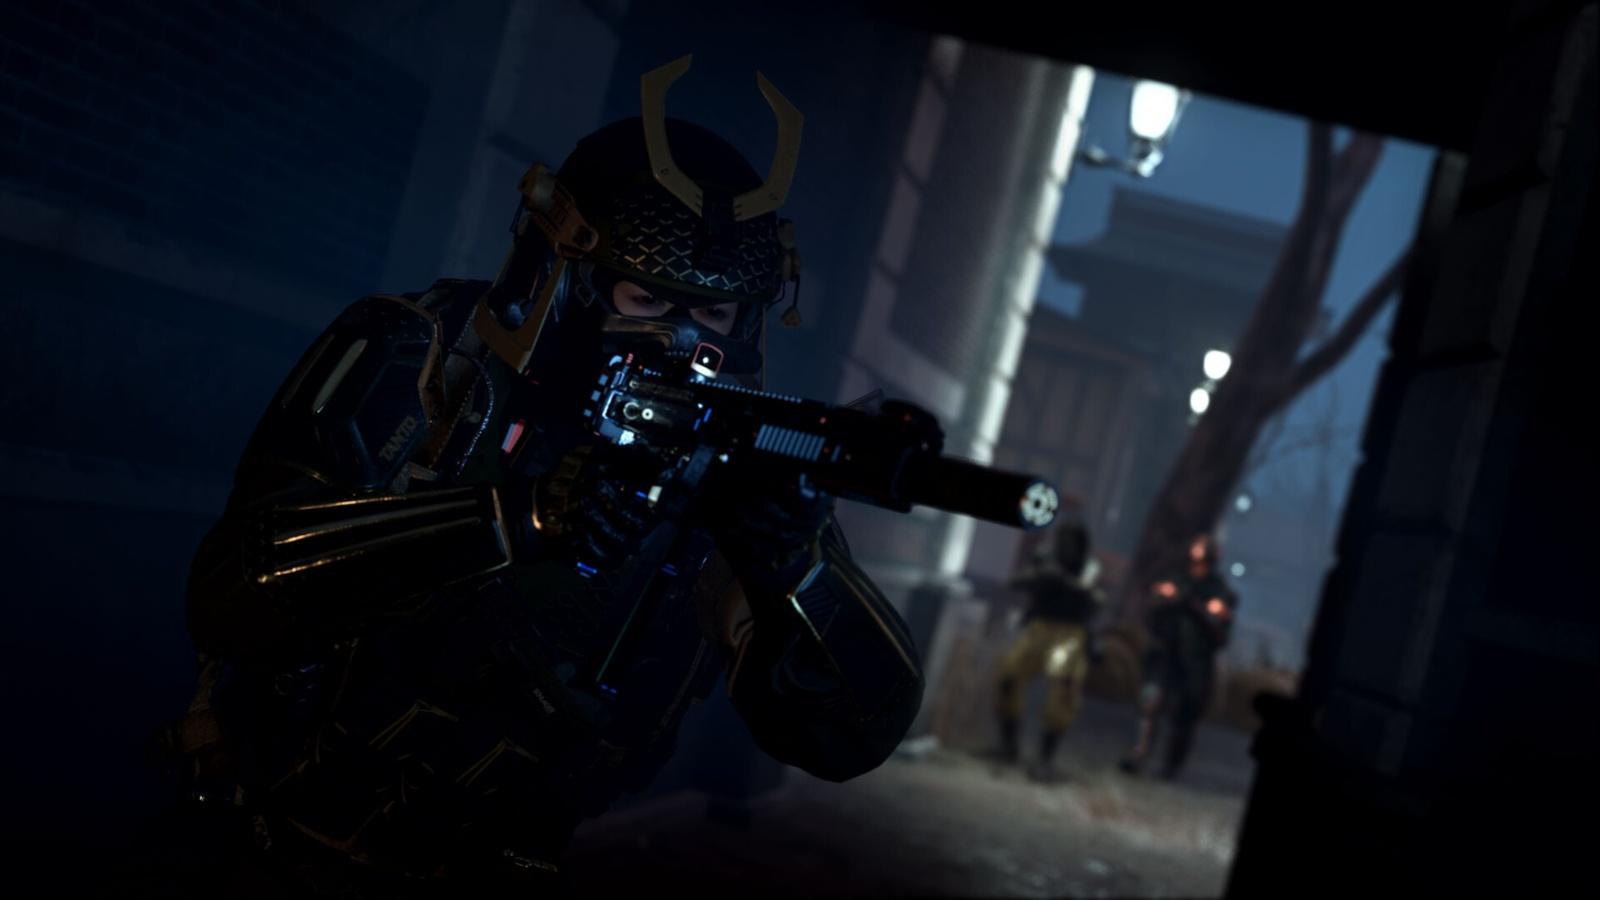 A screenshot from the game Warzone